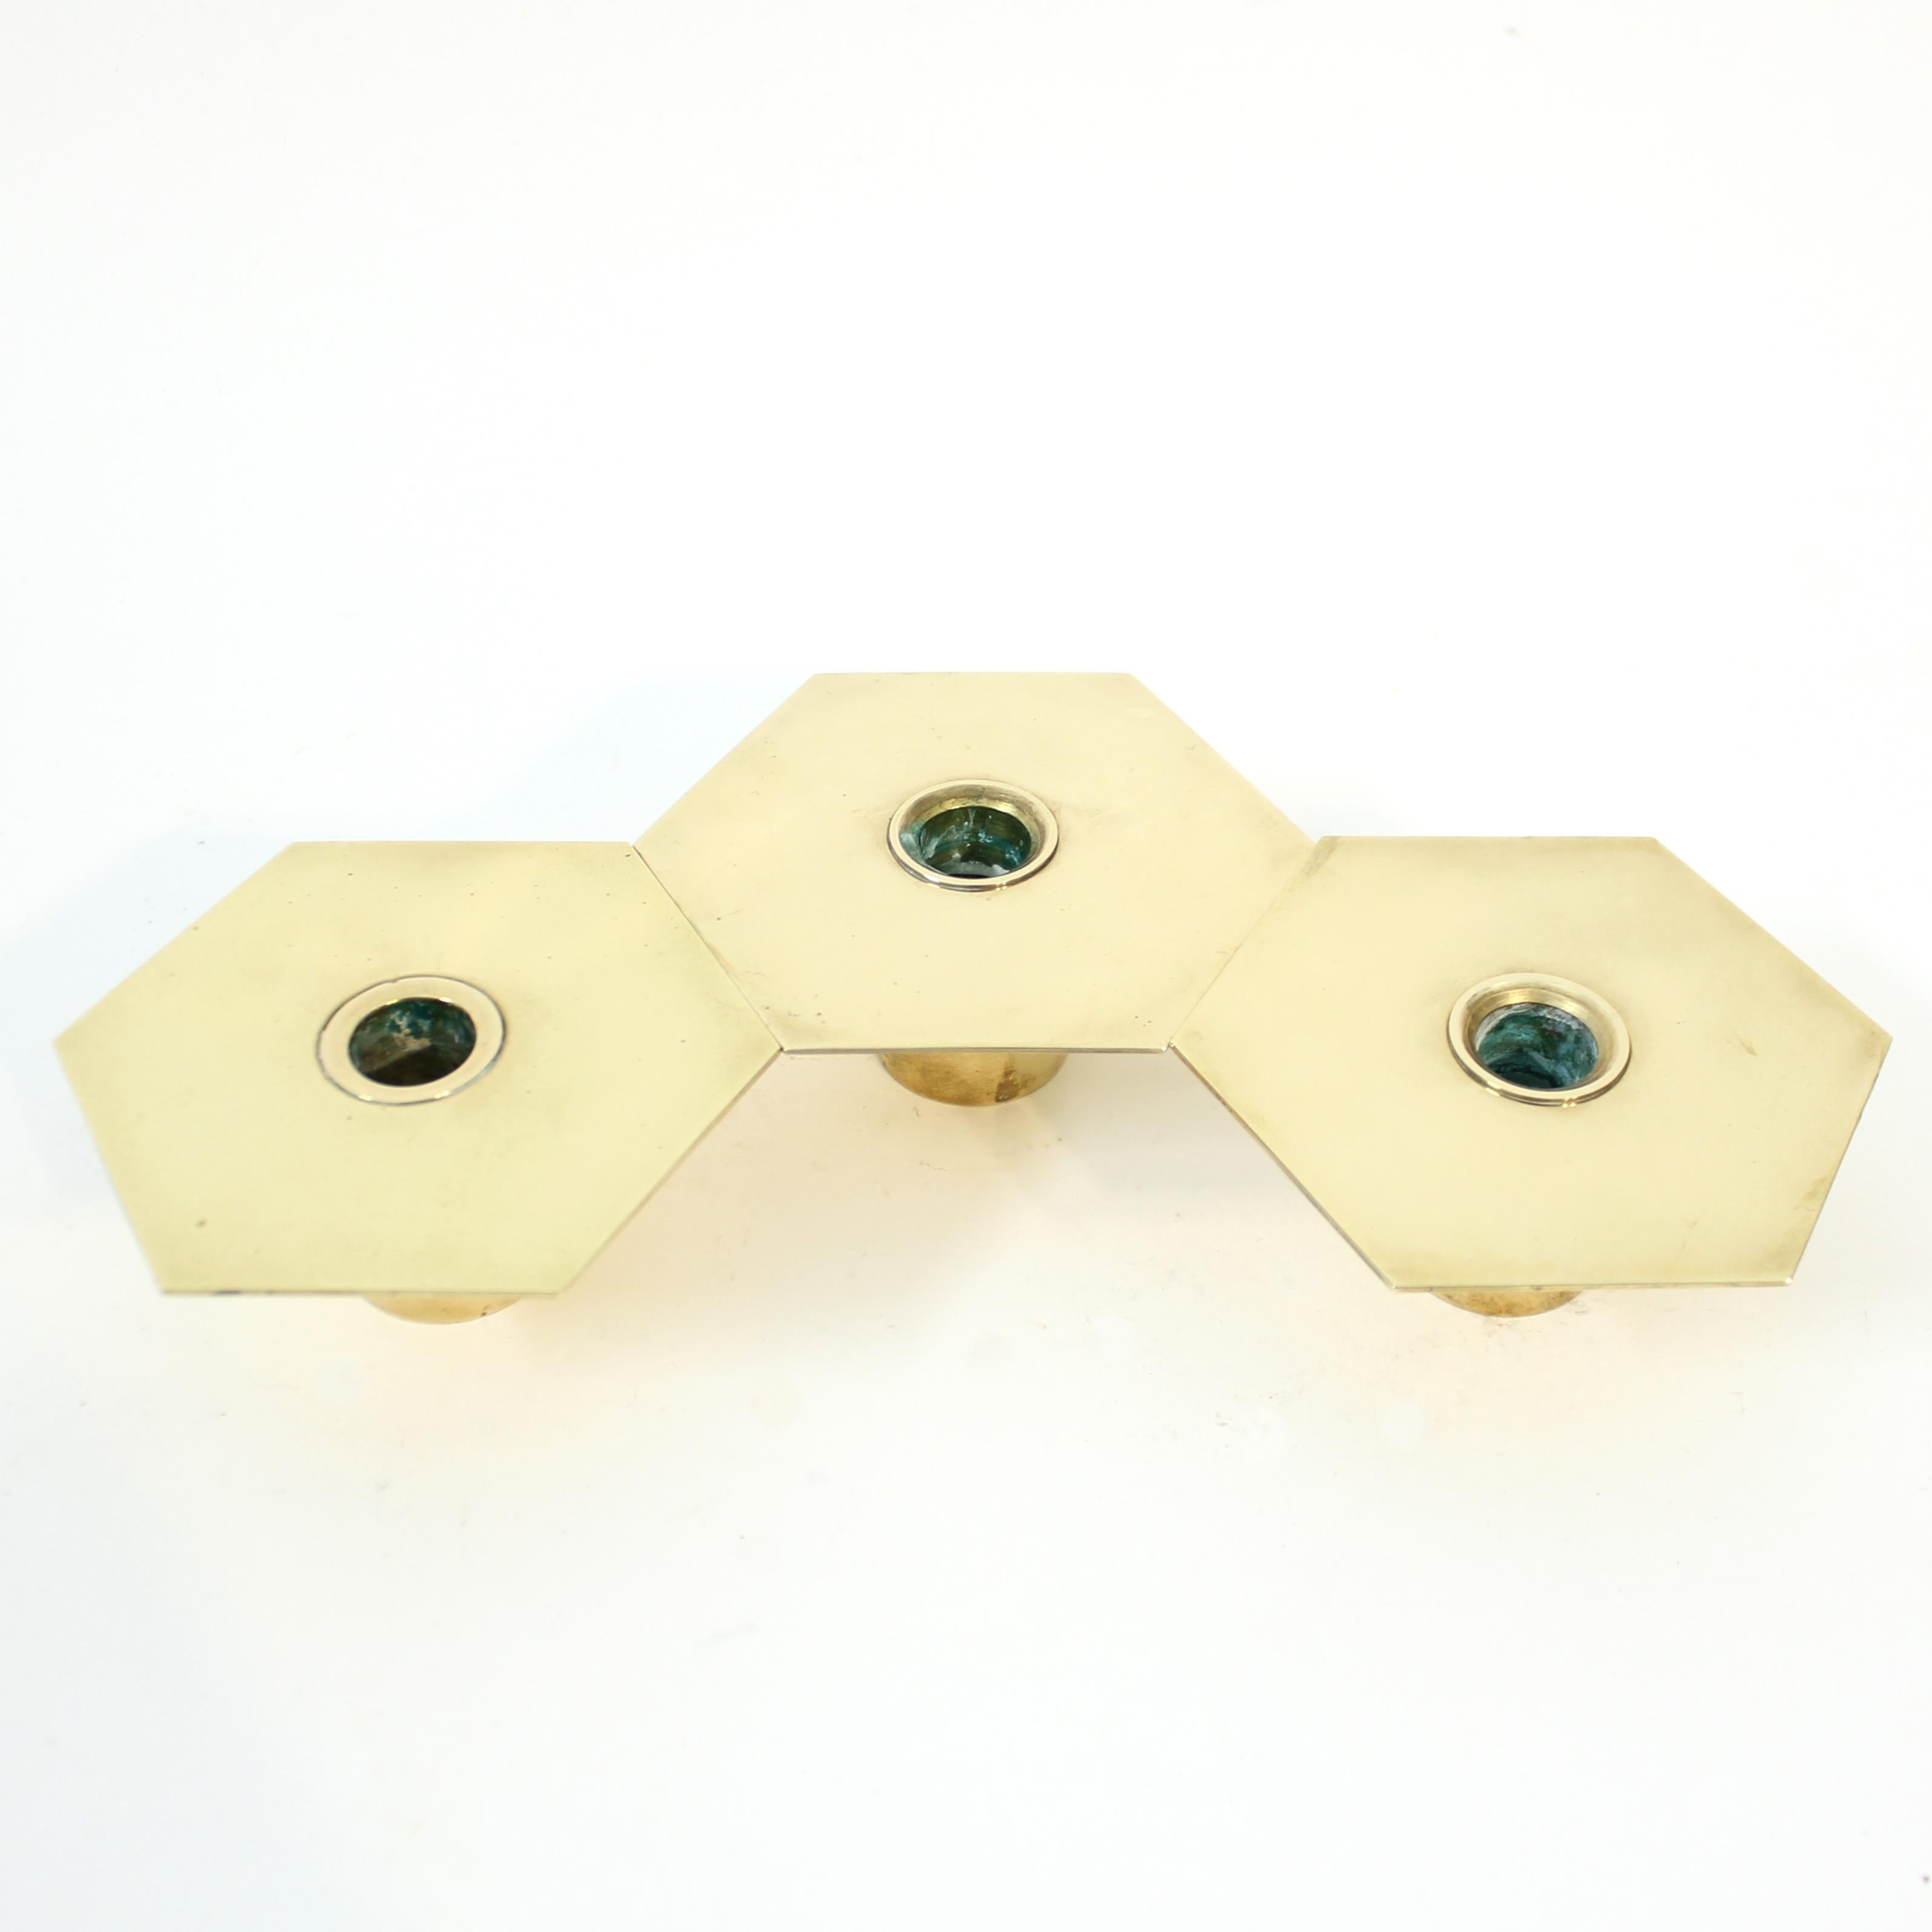 Sigurd Persson, set of 3 brass Romb candle holders, 1980s For Sale 2